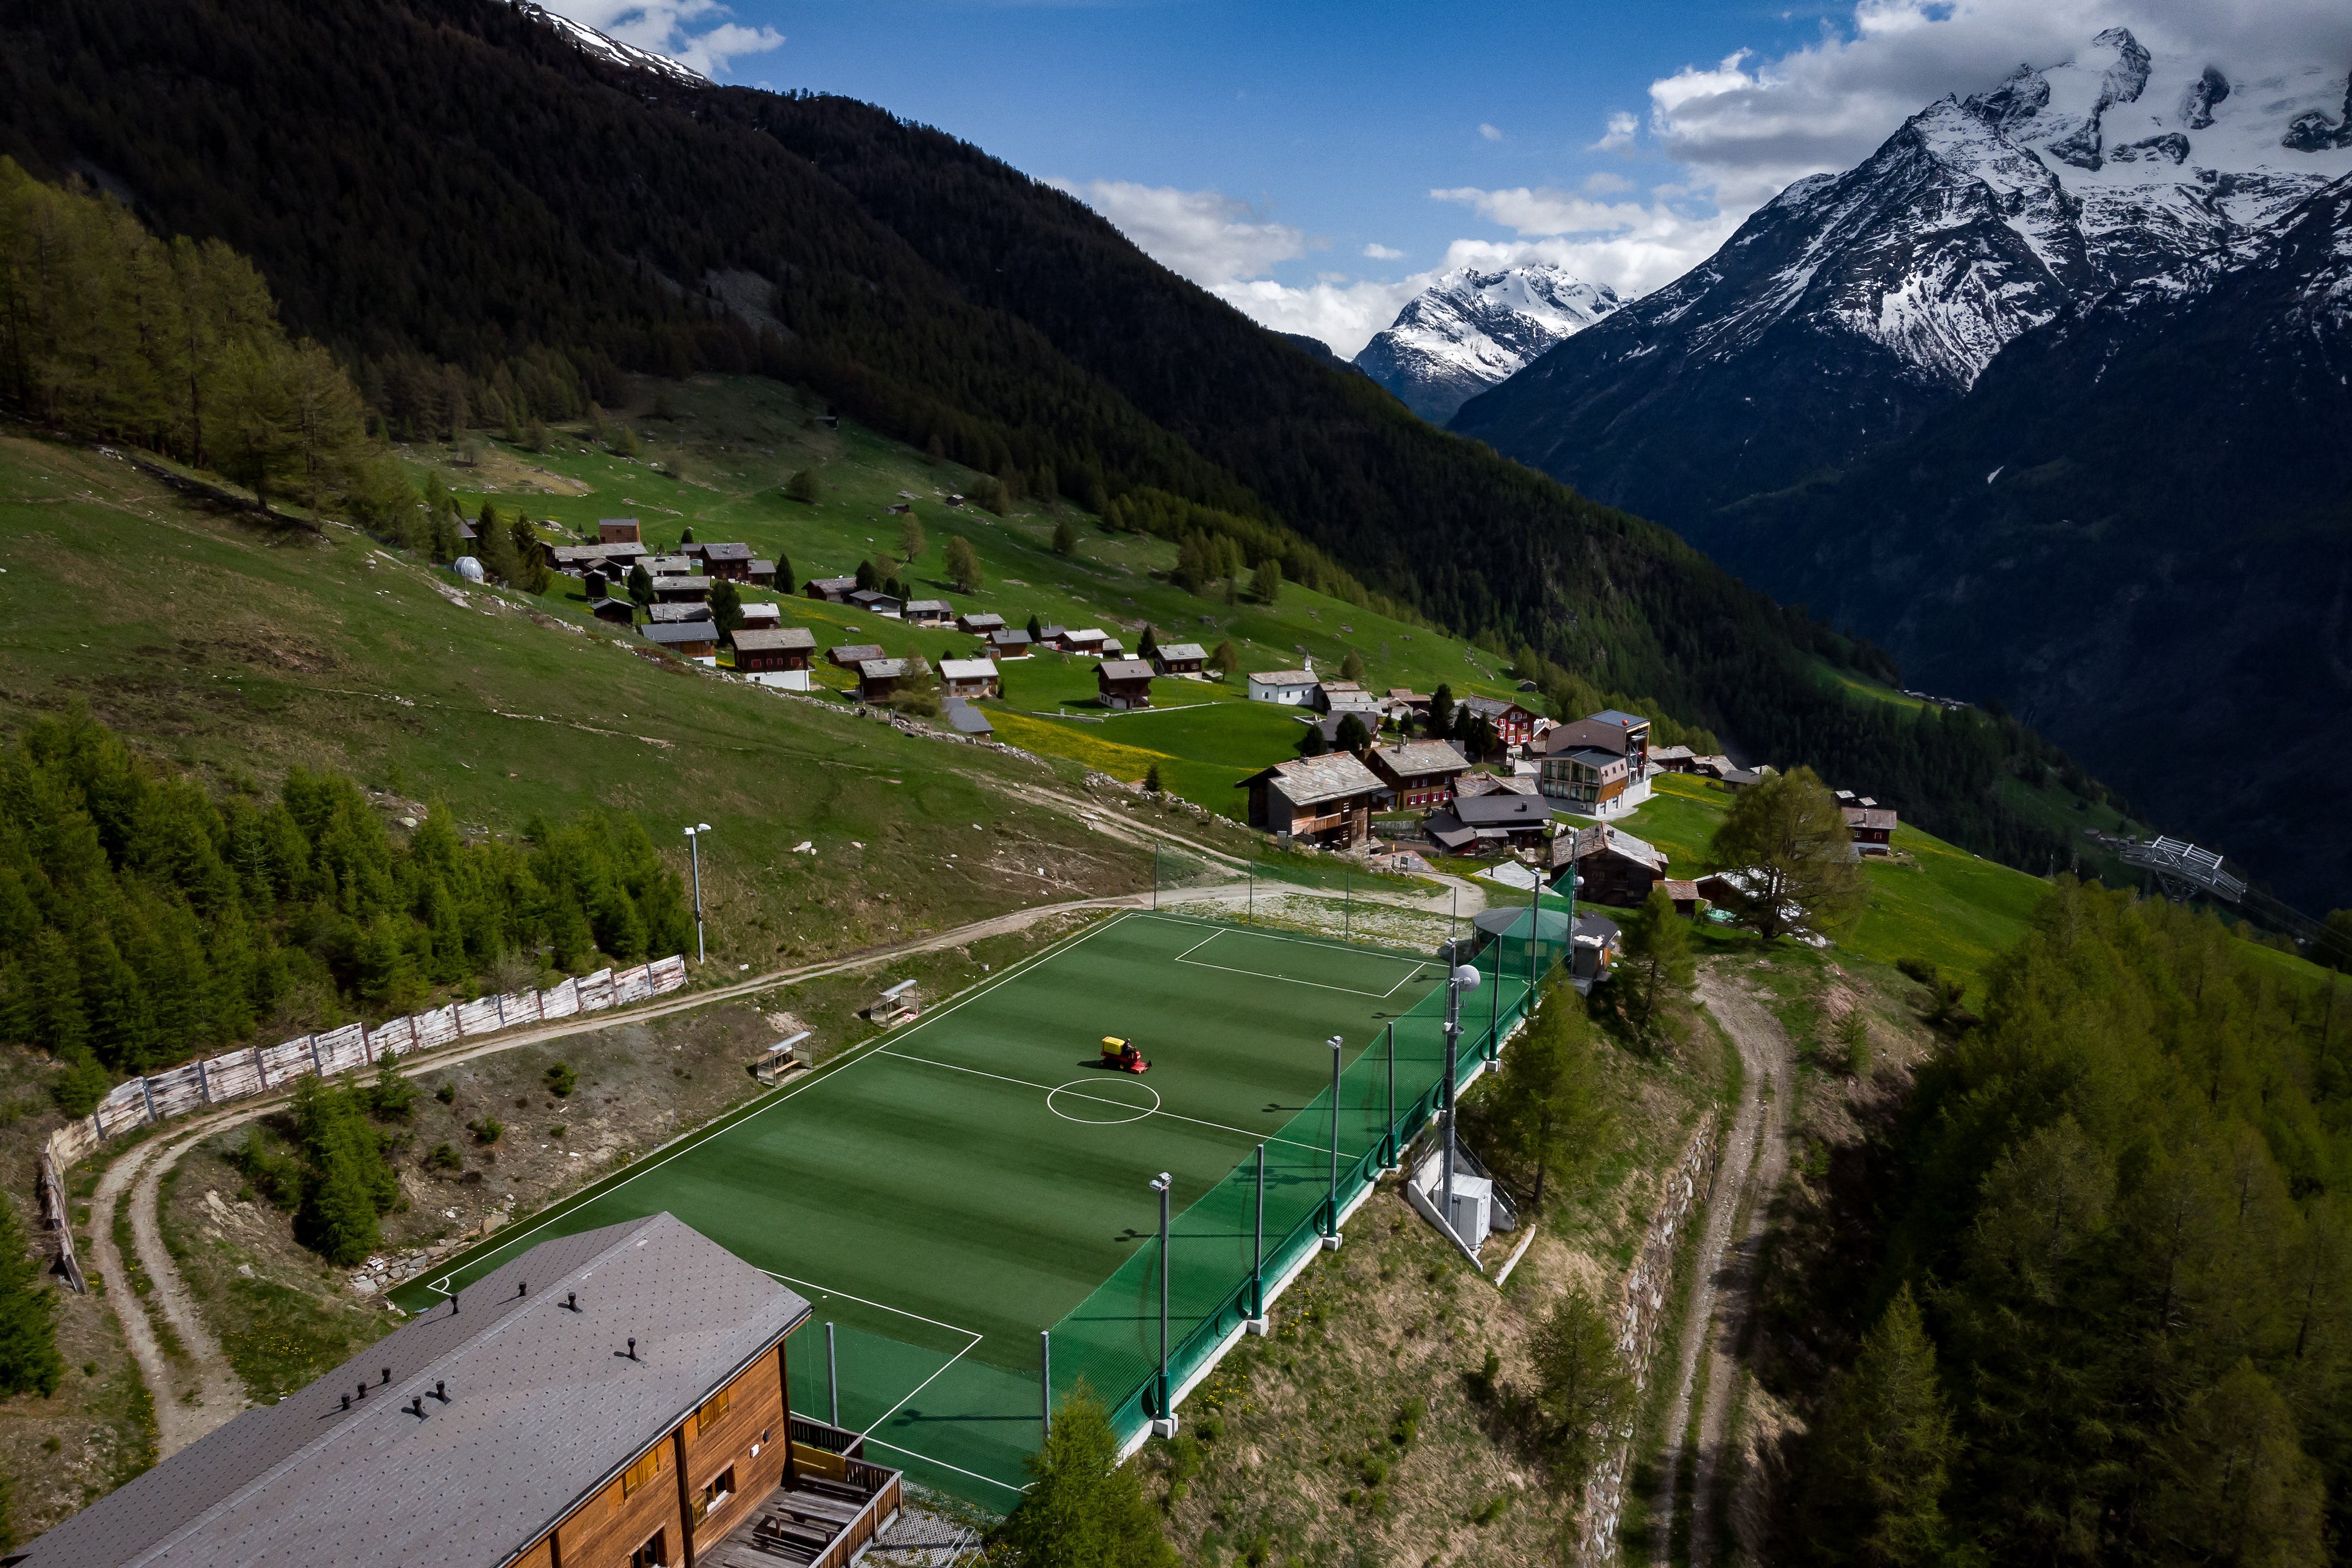 The Ottmar Hitzfeld Arena, home to the Swiss Mountain League’s FC Gspon, is one of the most spectacular sporting venues in the world. Photo: AFP